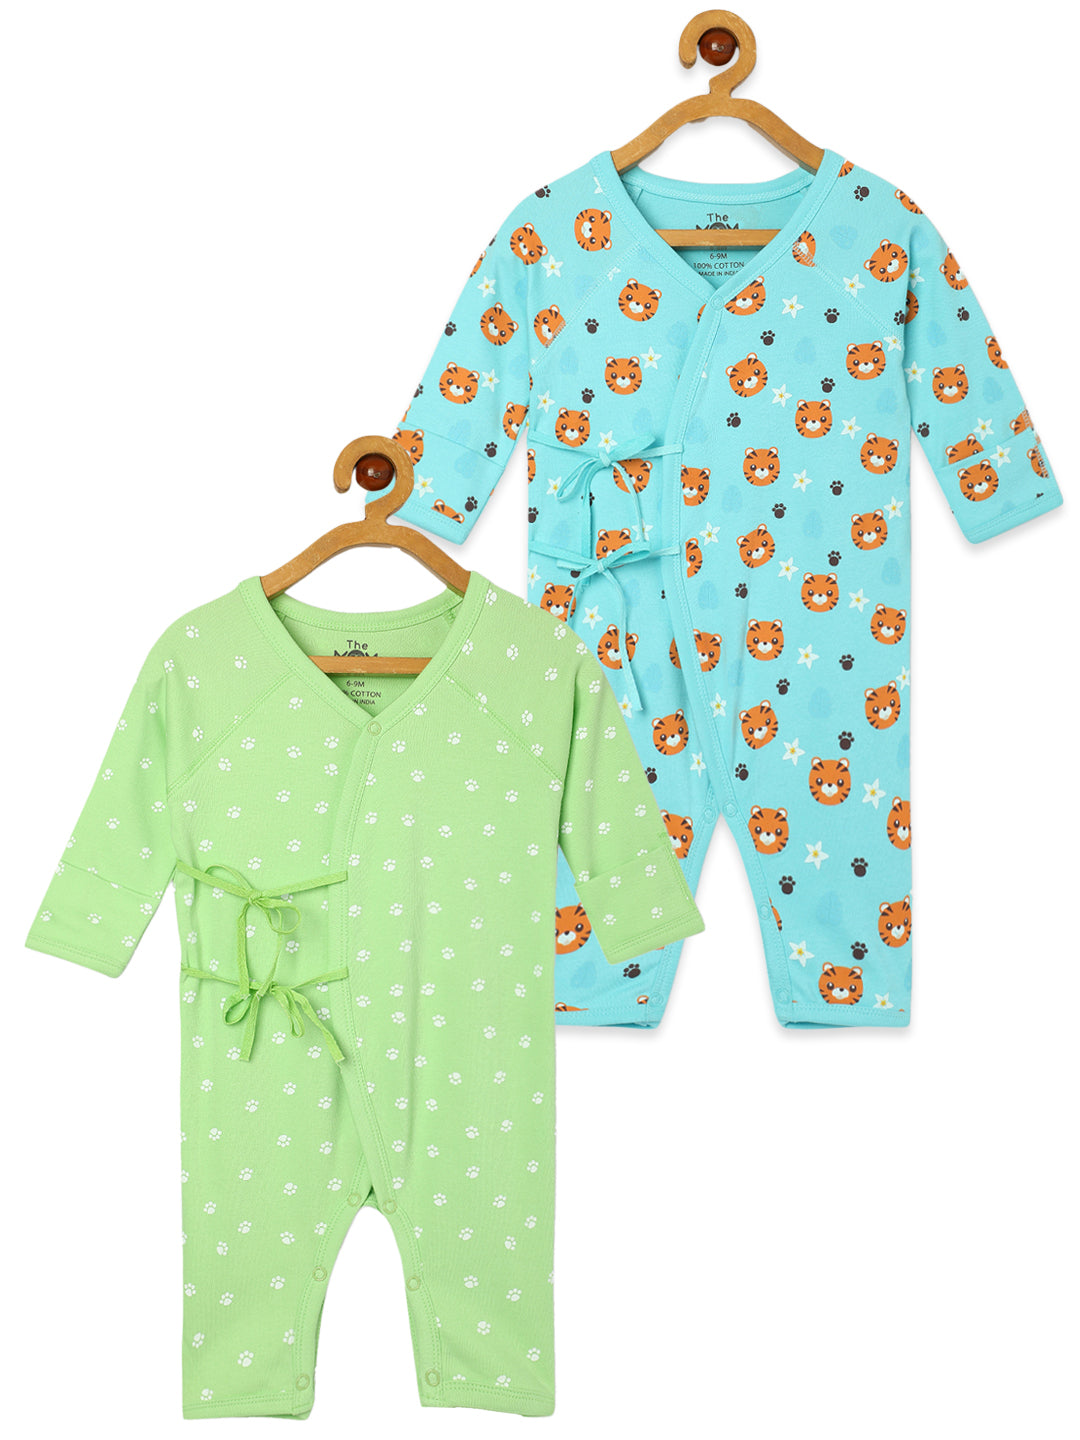 Jabla Infant Romper Combo Of 2: Feline Fighters - Staying Pawsitive